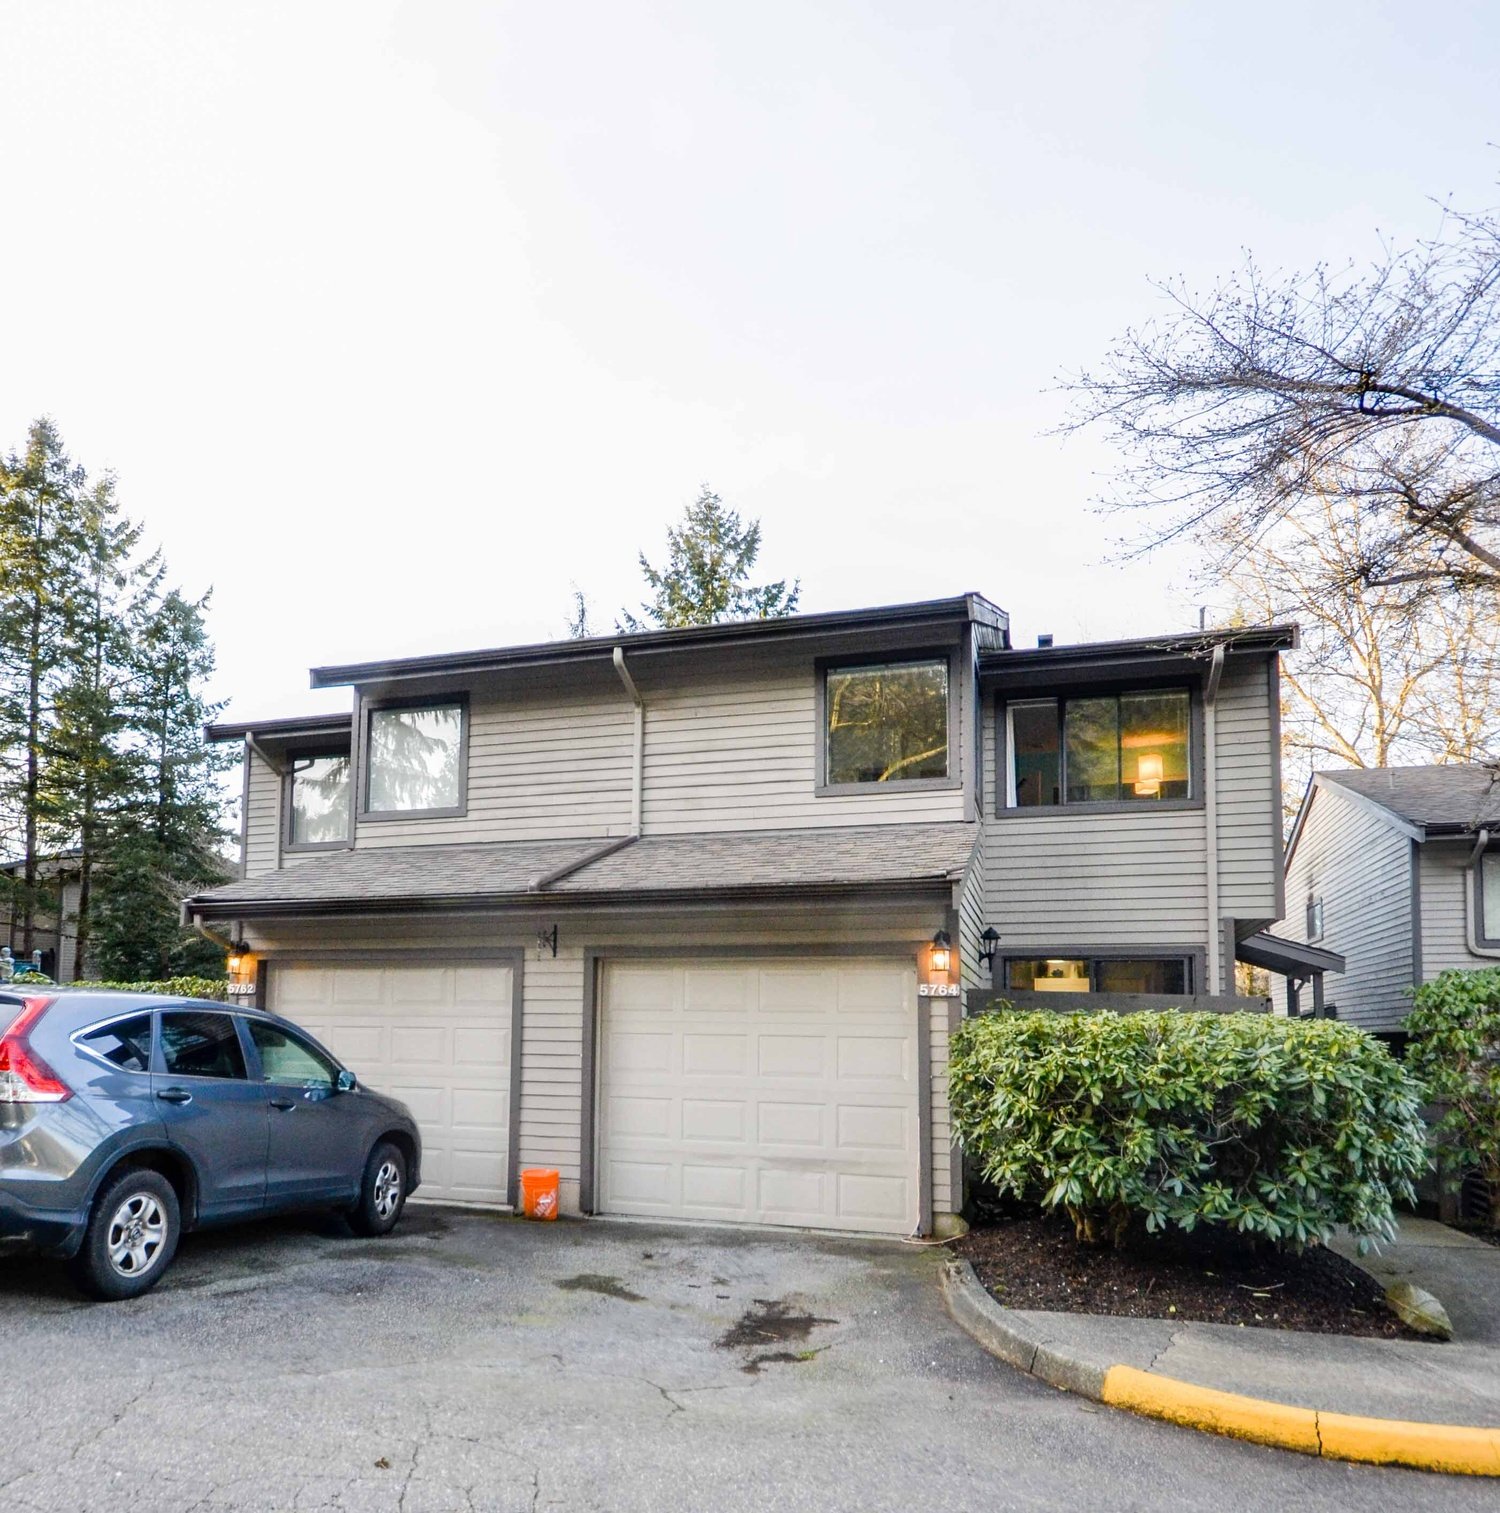 mayview crescent Burnaby South